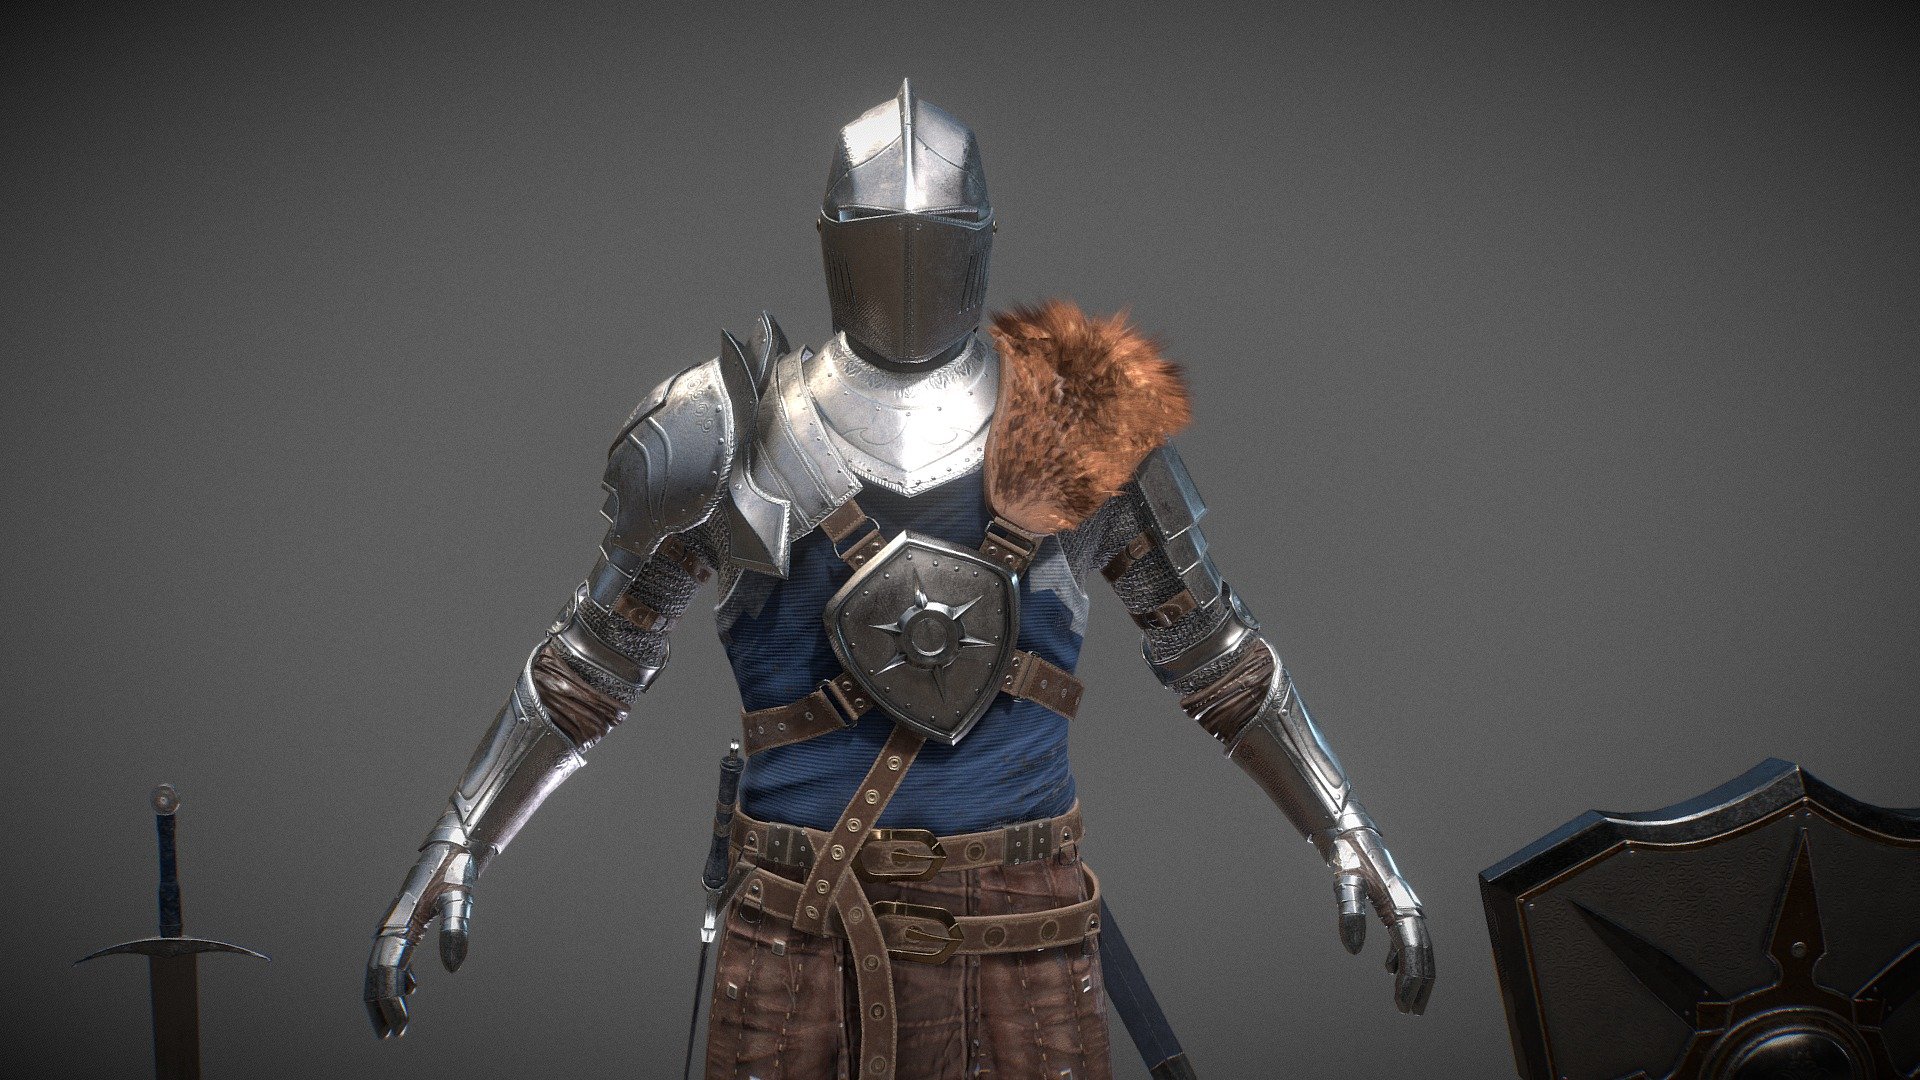 Originally Created in blender 2.9
The character is in game quality with 40K polygons.

File Does not include any rigging or animation

2 Version Included in the File :
- One with Side Sword Bag
- One with Back Sword Bag

File Includes :
- Fbx File with 4K Textures
- OBJ File with 4K Textures
- Blend File with Packed Textures and Materials

Features:
- Different Materials are assigned as different colors.
- Model is fully textured with all materials applied in Blender File..
- No special plugin needed to open blender file.
- Model does not include any backgrounds or Hdri used in preview images.

Texture Format:
- Png with 4K Resolution (4096X4096) - 3D Medieval Knight with Armor and Fur | Version1 - Buy Royalty Free 3D model by AneeshArts 3d model